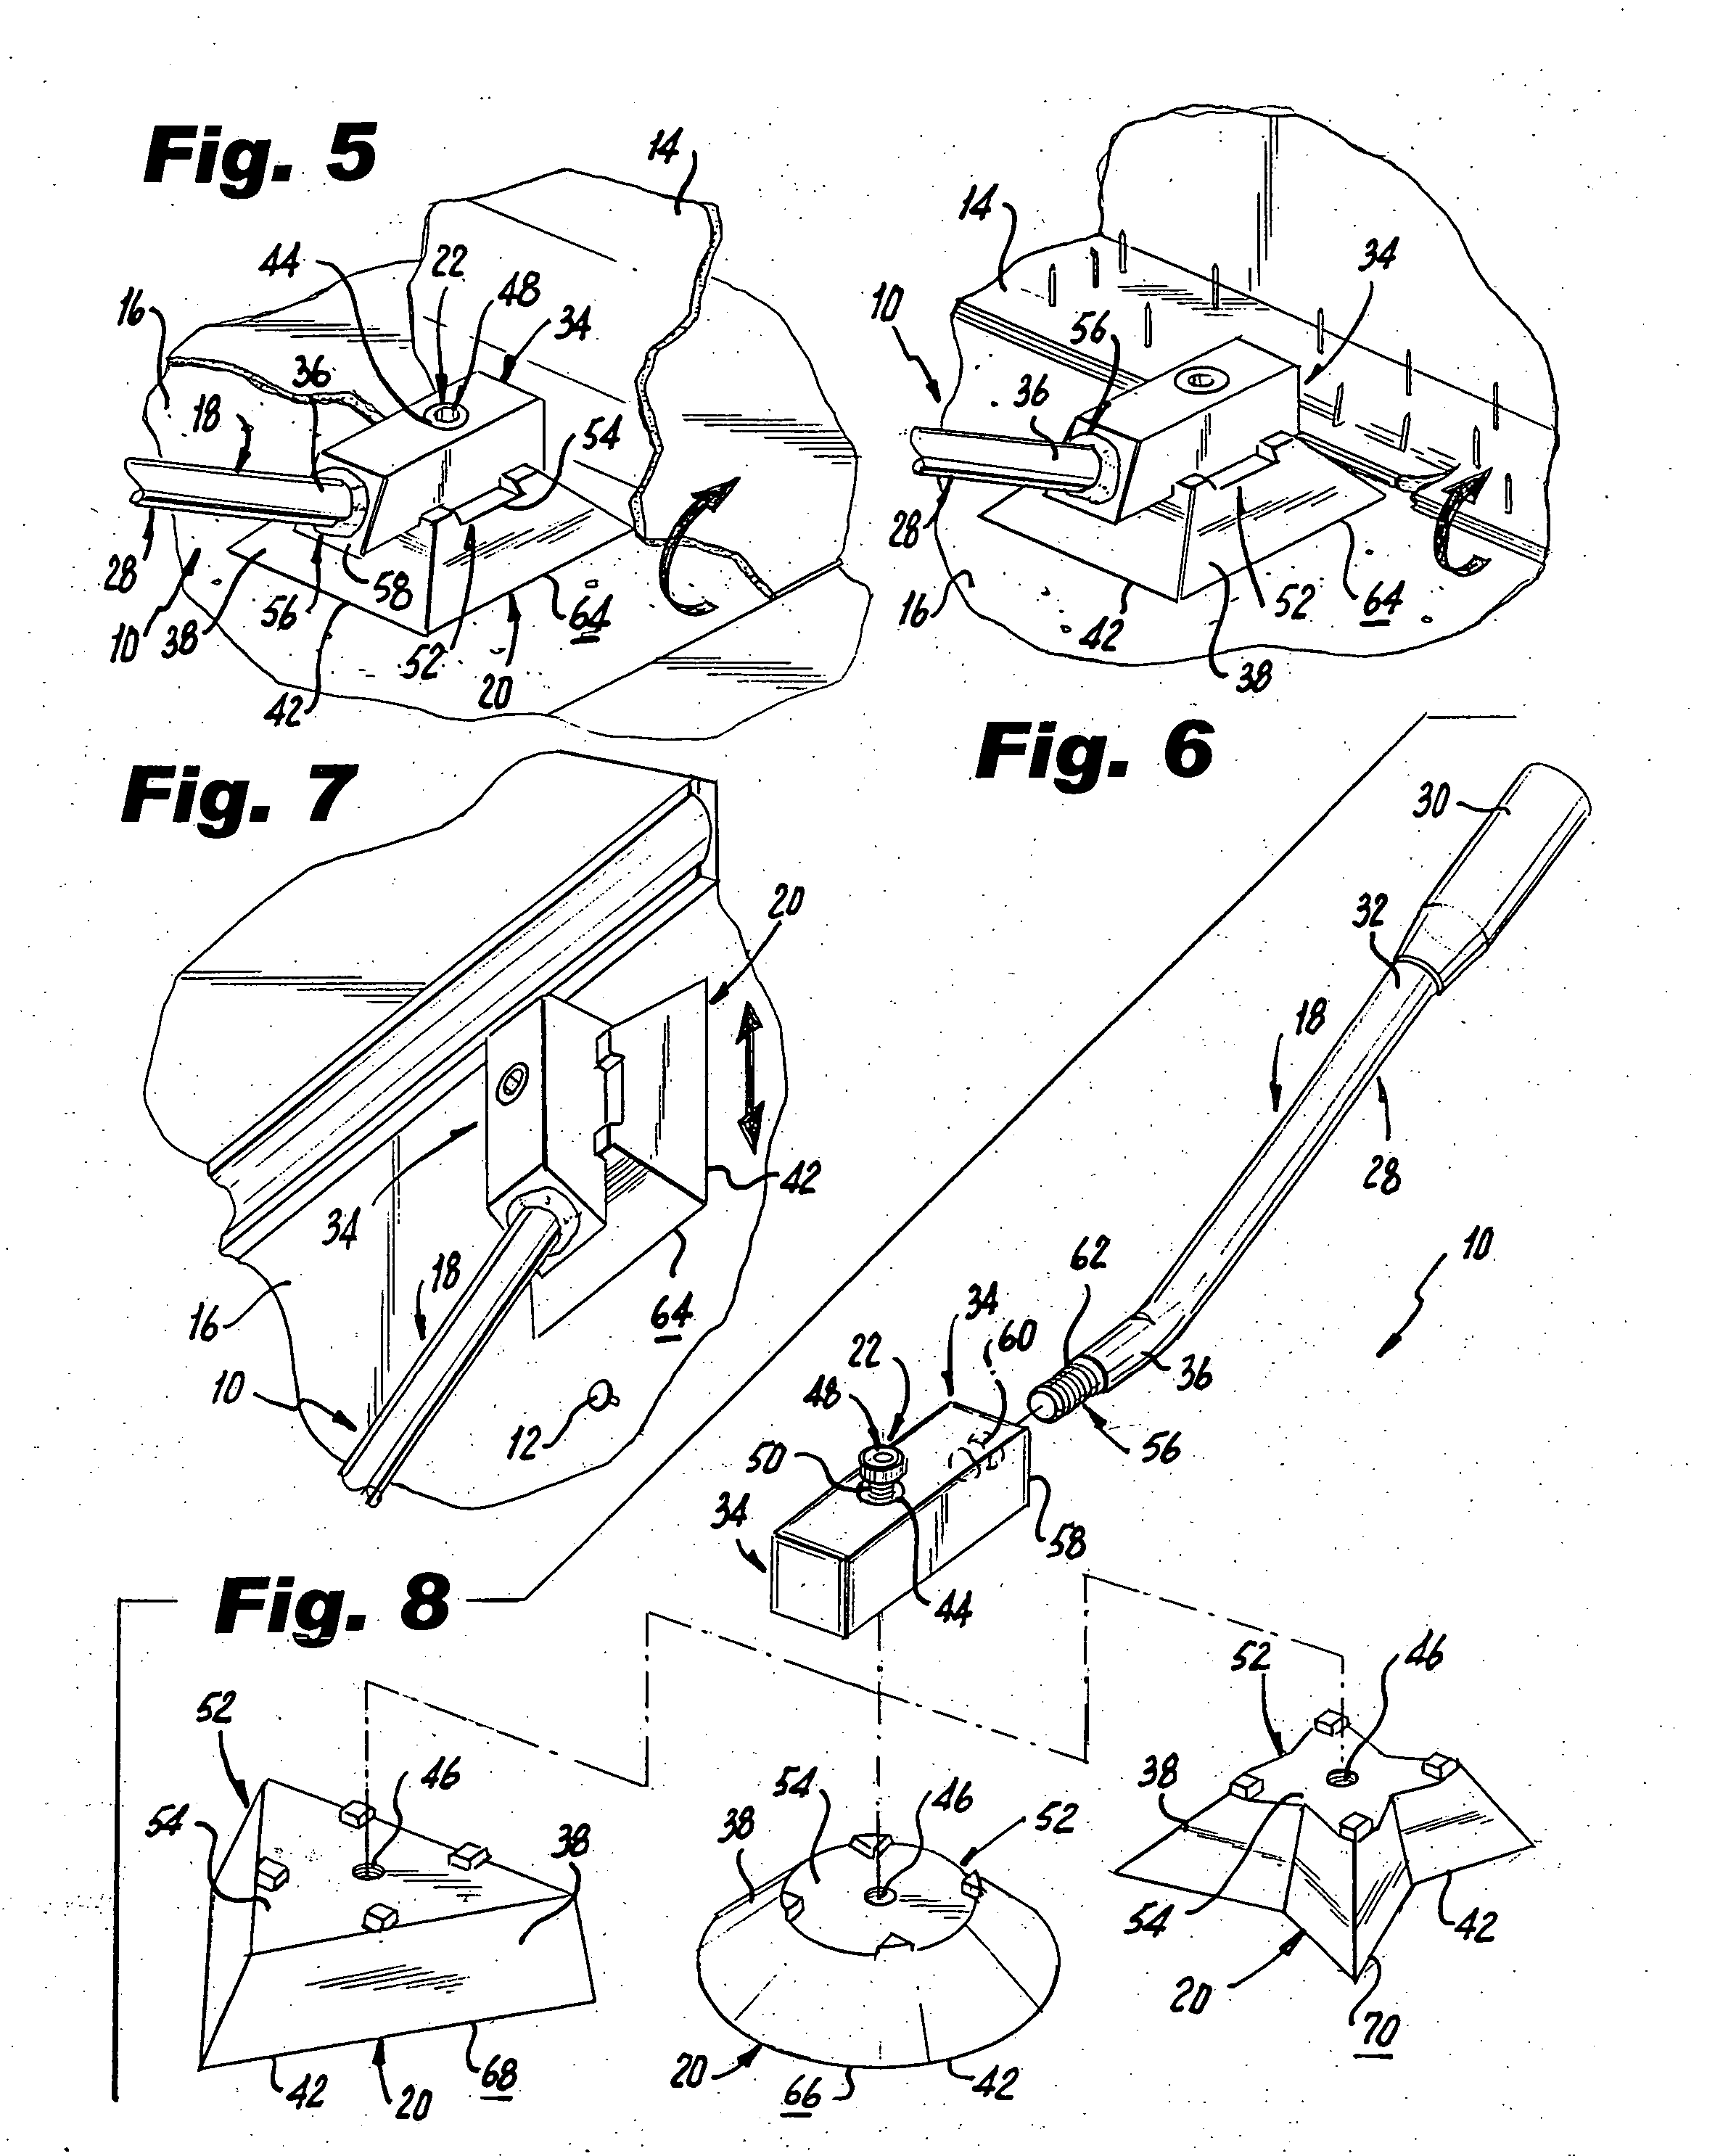 Scraper having weighted cutting head for removing nail heads and other debris from surfaces